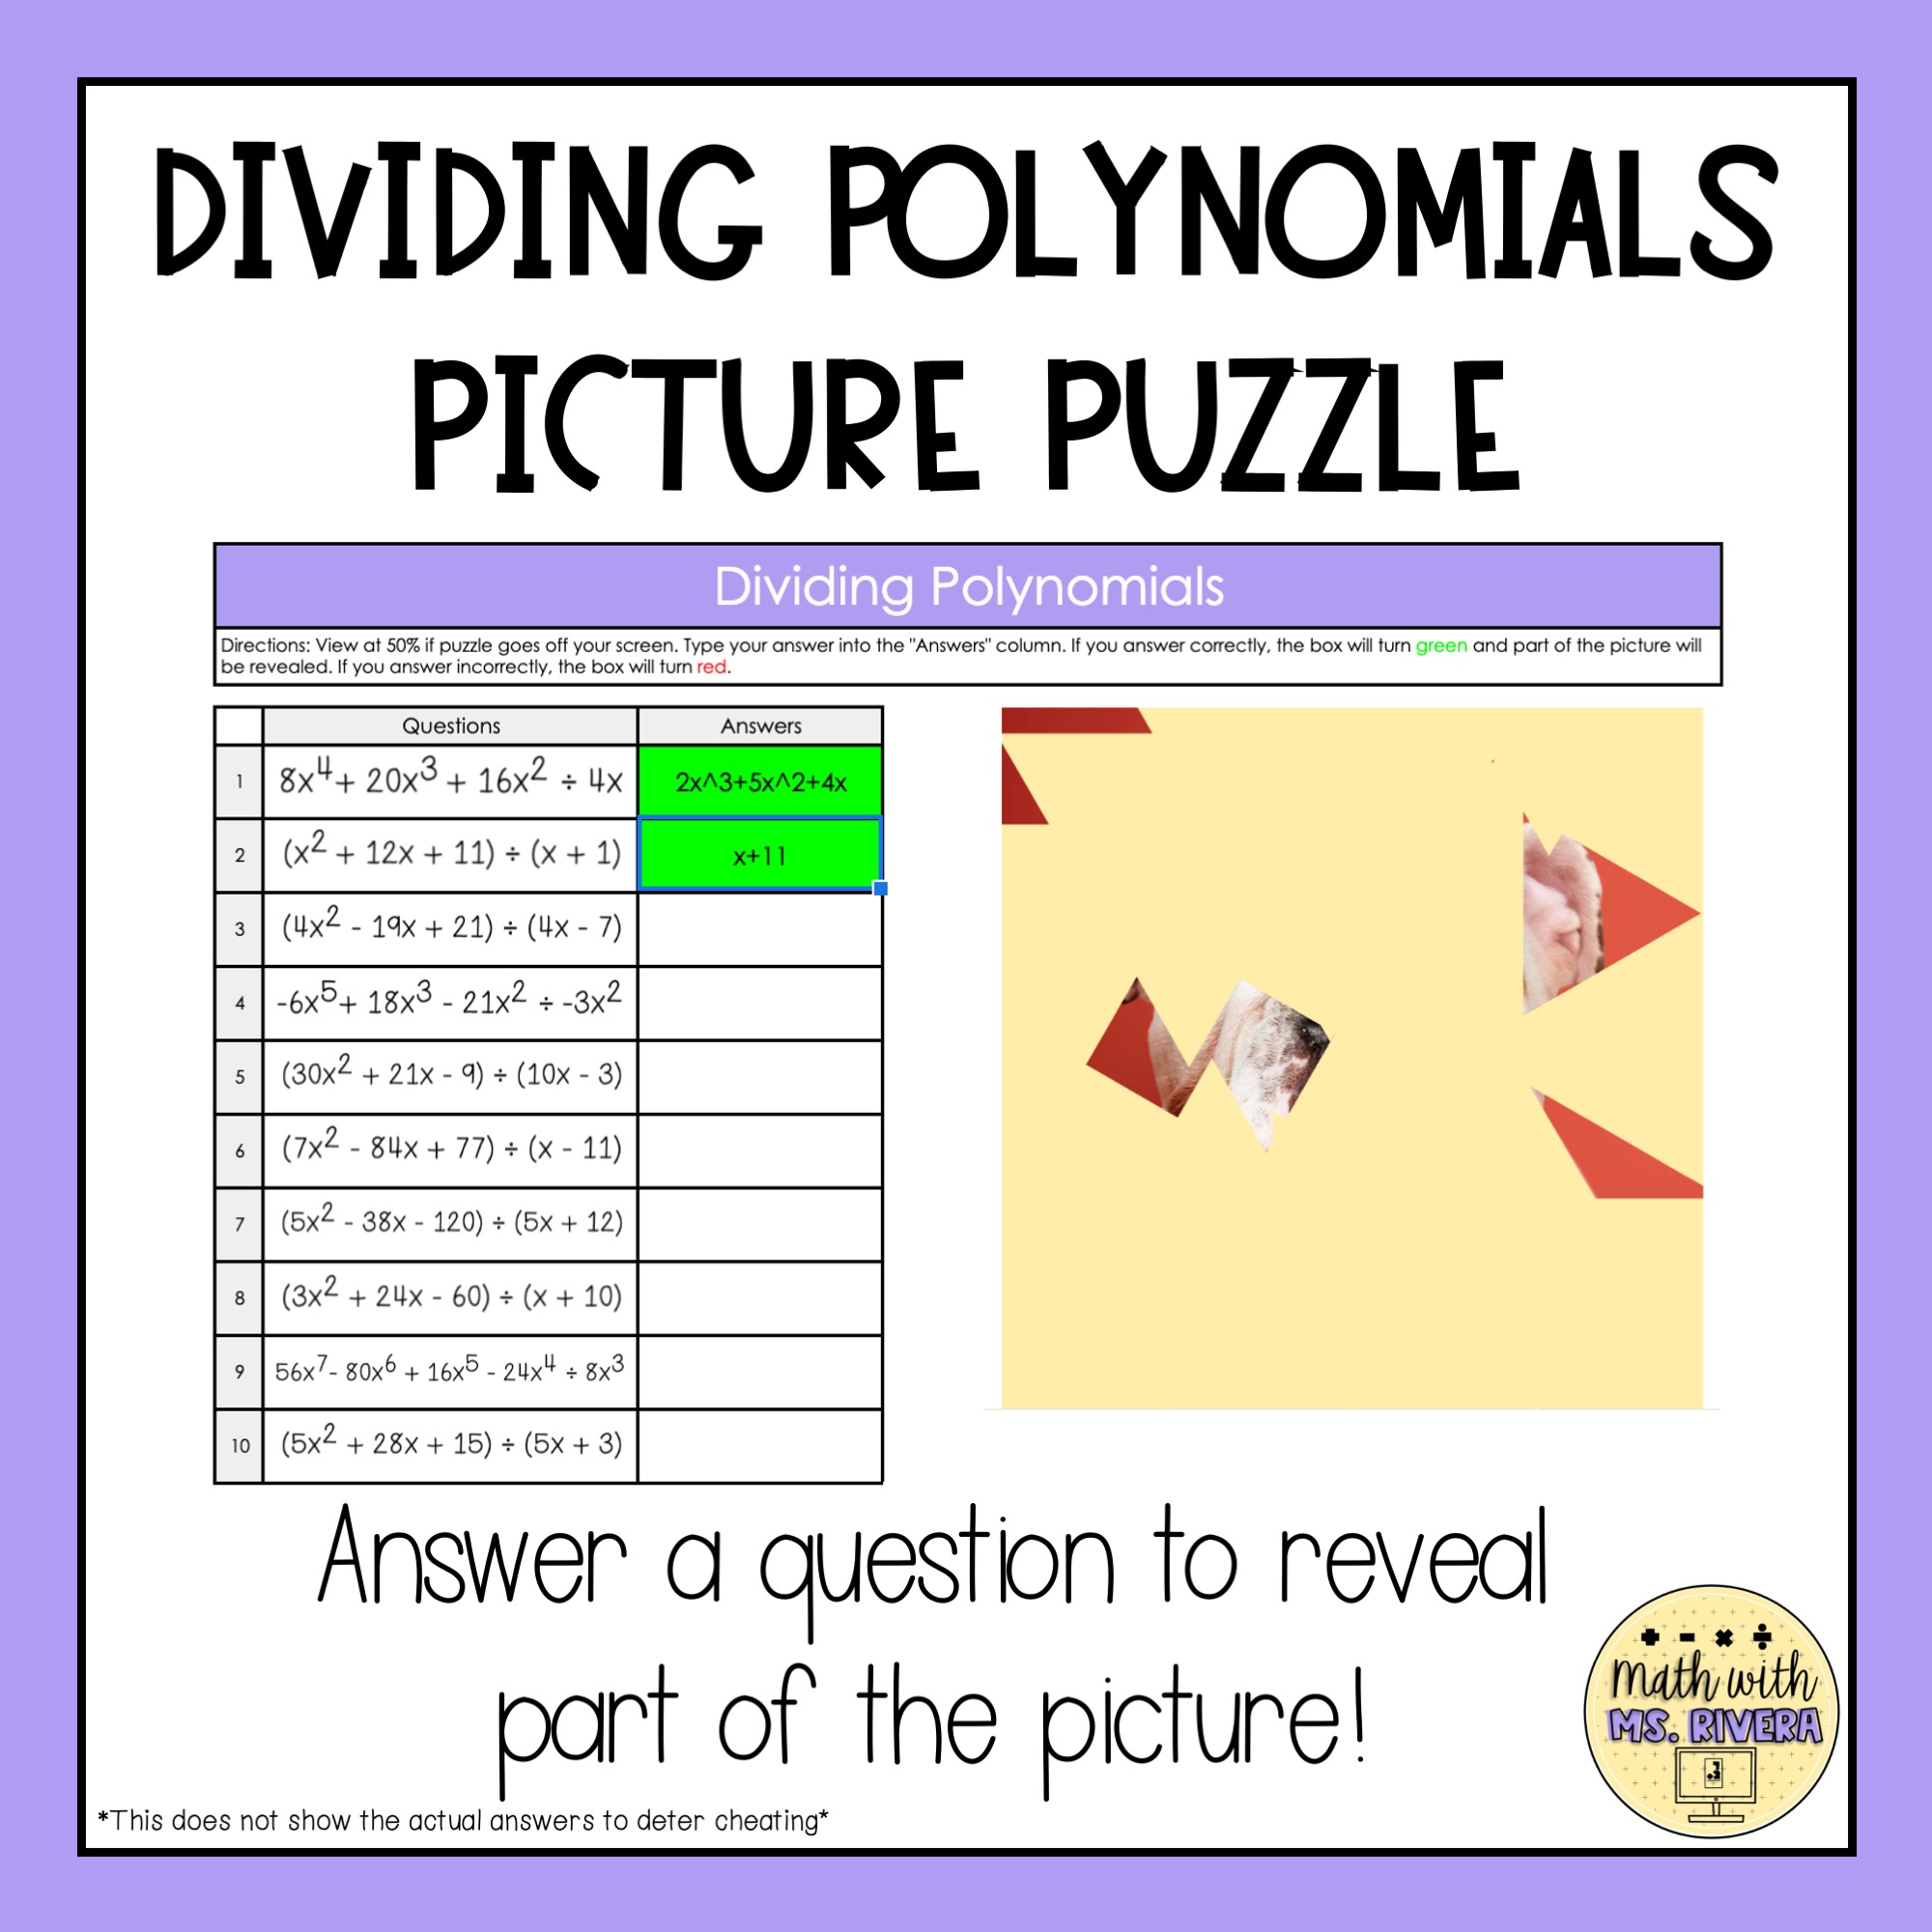 Dividing Polynomials Digital Picture Puzzle - Math with Ms. Rivera